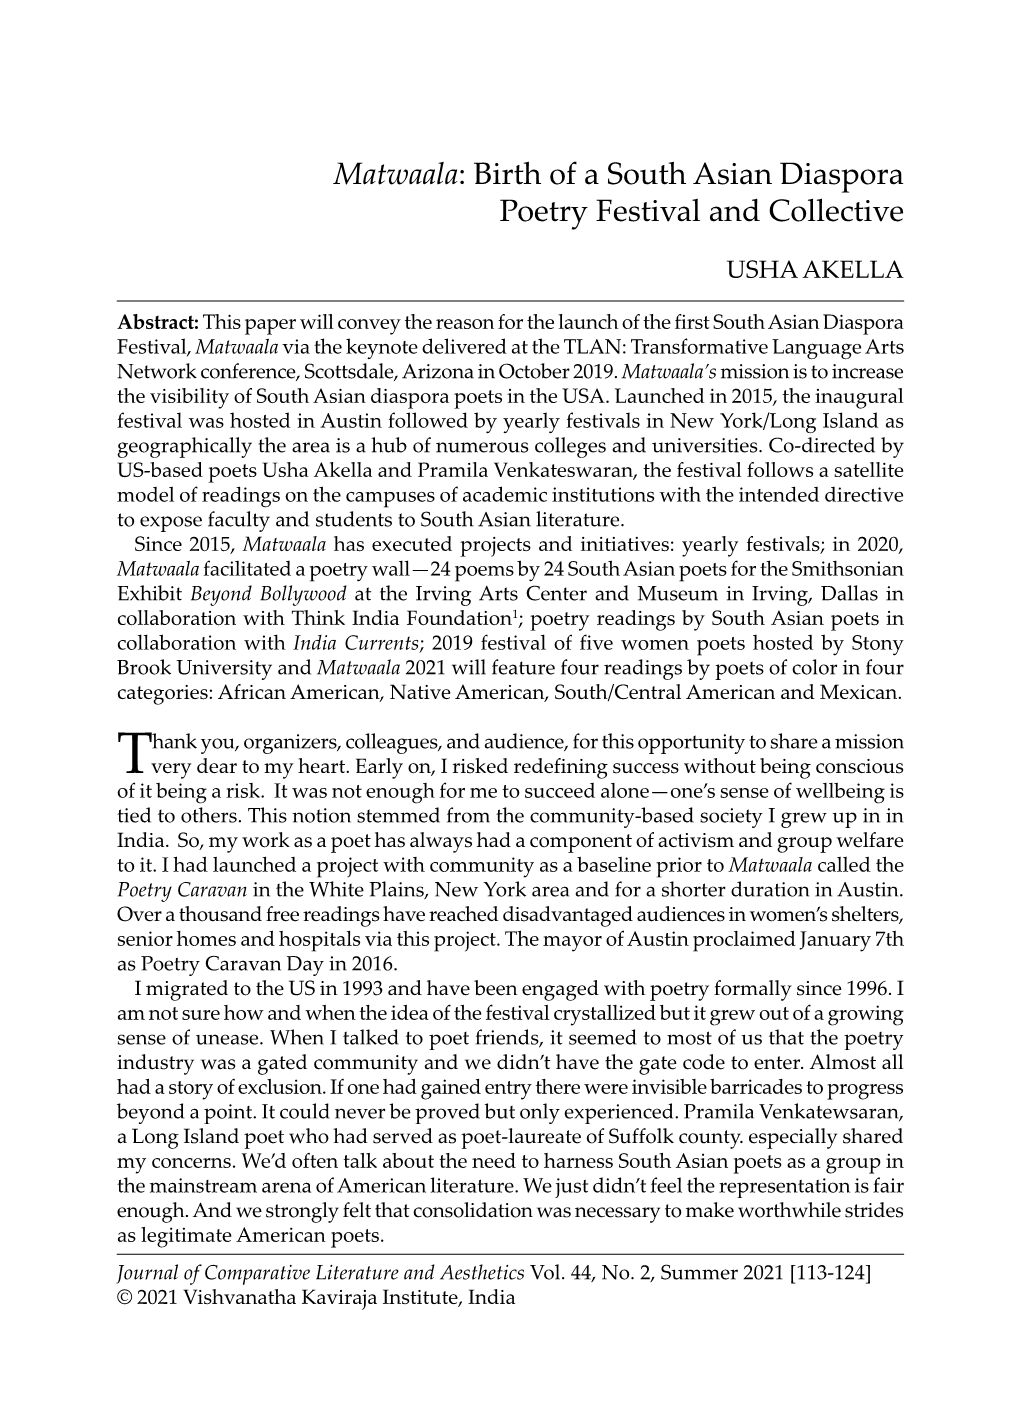 Matwaala: Birth of a South Asian Diaspora Poetry Festival and Collective